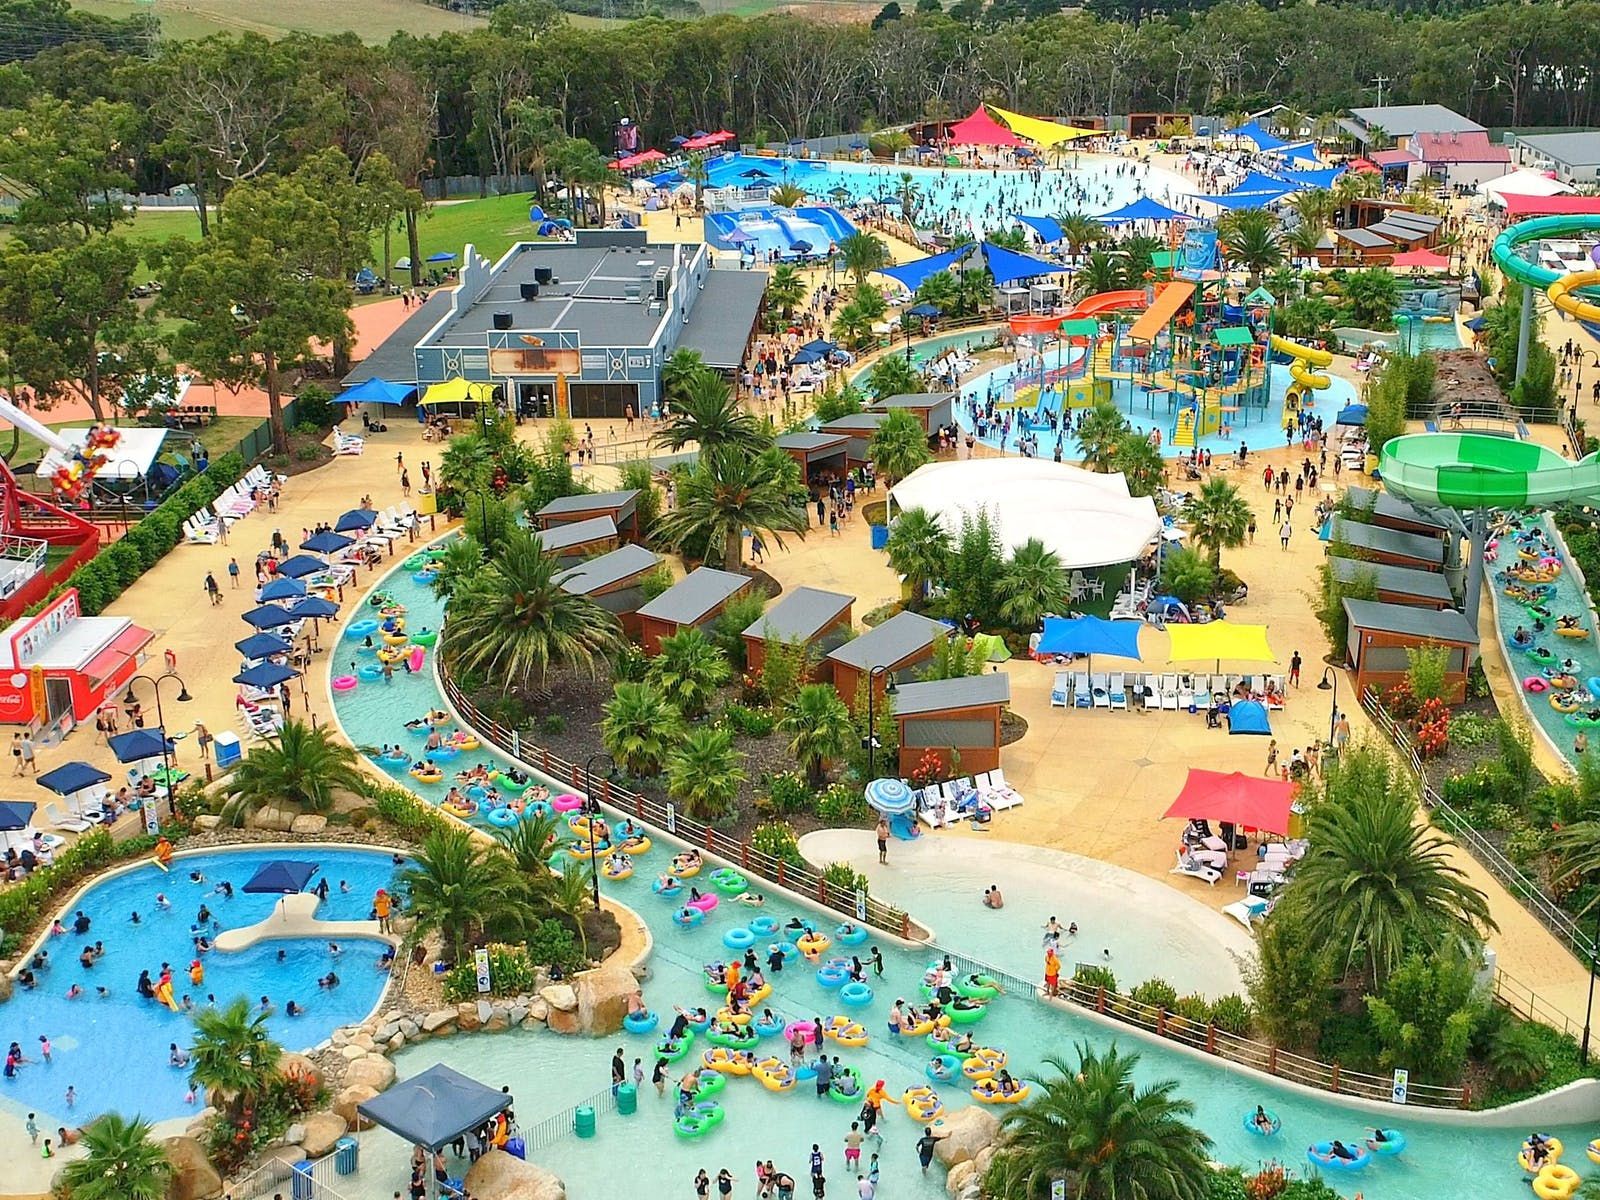 Overhead image of Gumbuya world, featuring  prominent water park activities and plentiful palm trees